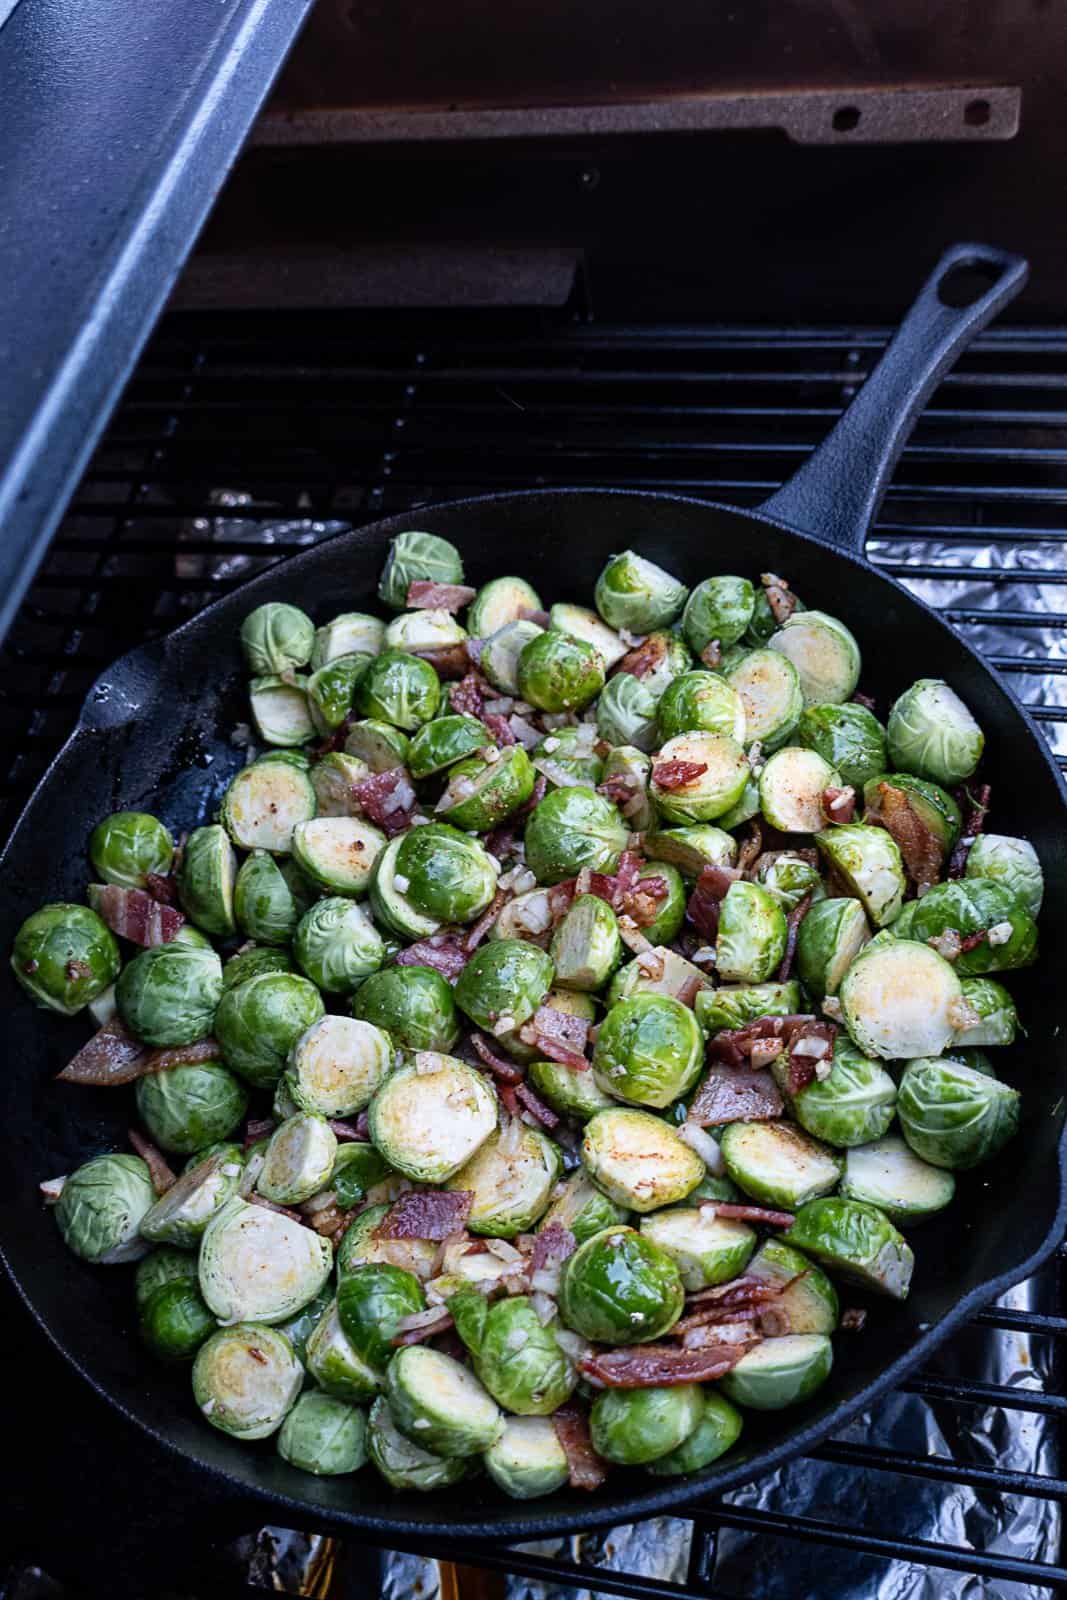 Smoking Brussels Sprouts with Bacon in a Cast Iron Skillet on the Traeger Pellet Grill